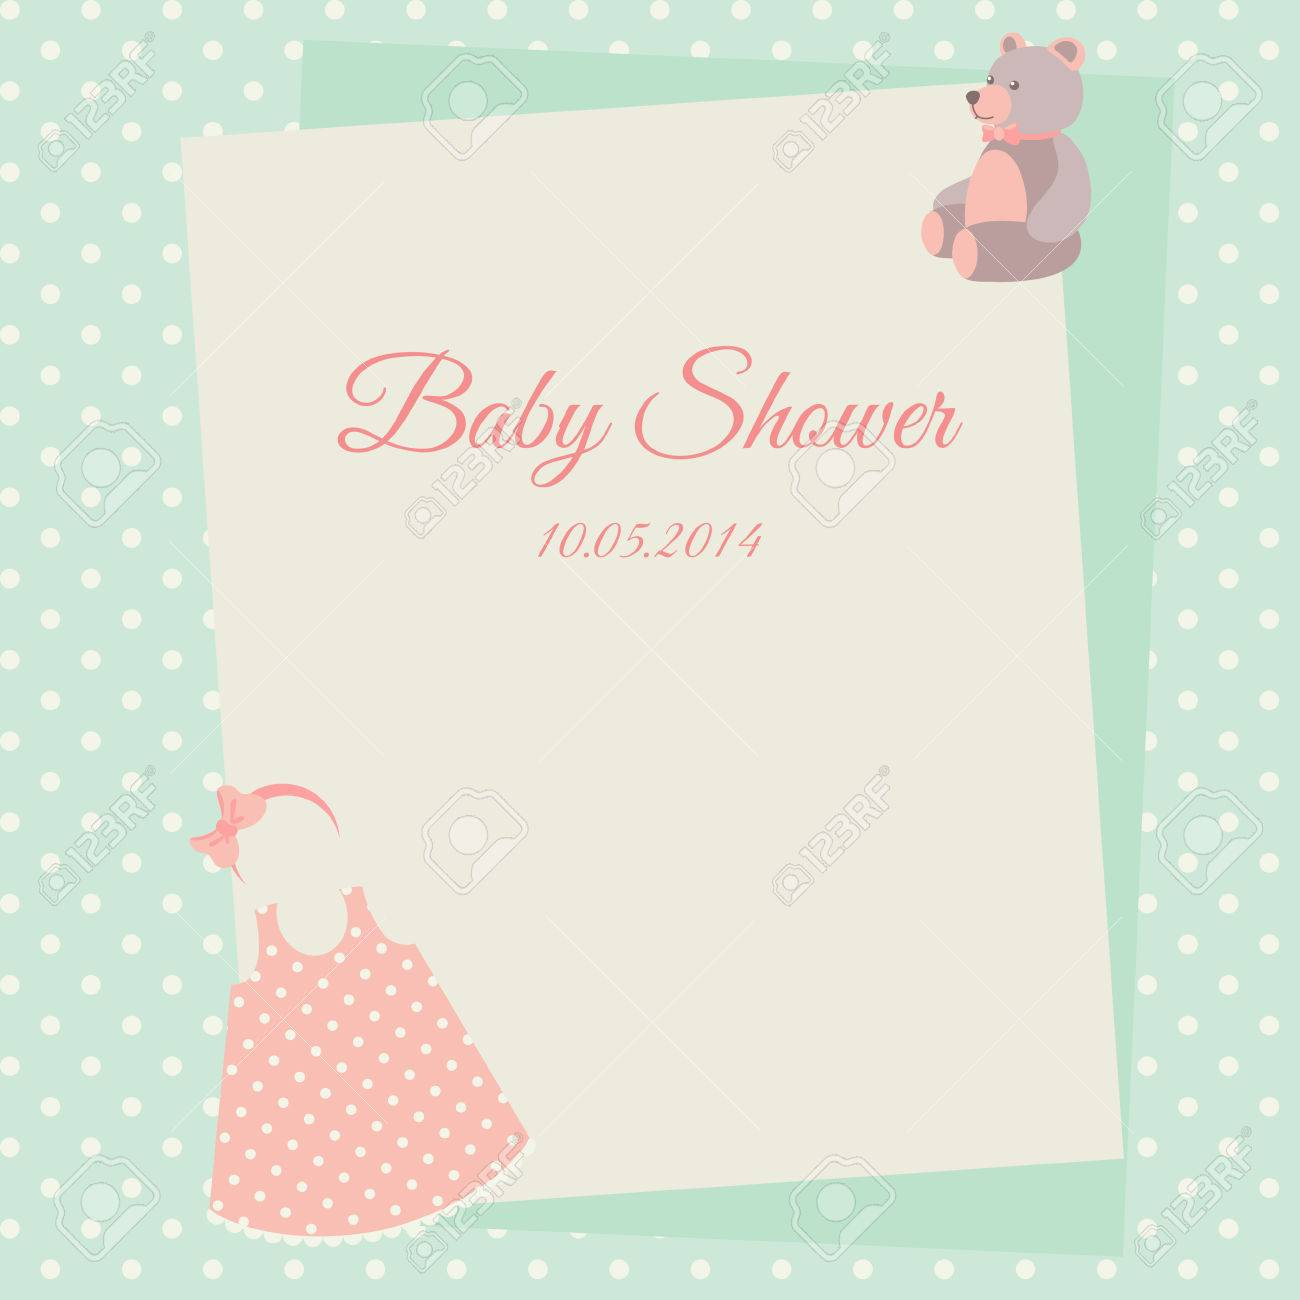 Ba Shower Invitation Card Template With Dress And Teddy Bear within dimensions 1300 X 1300